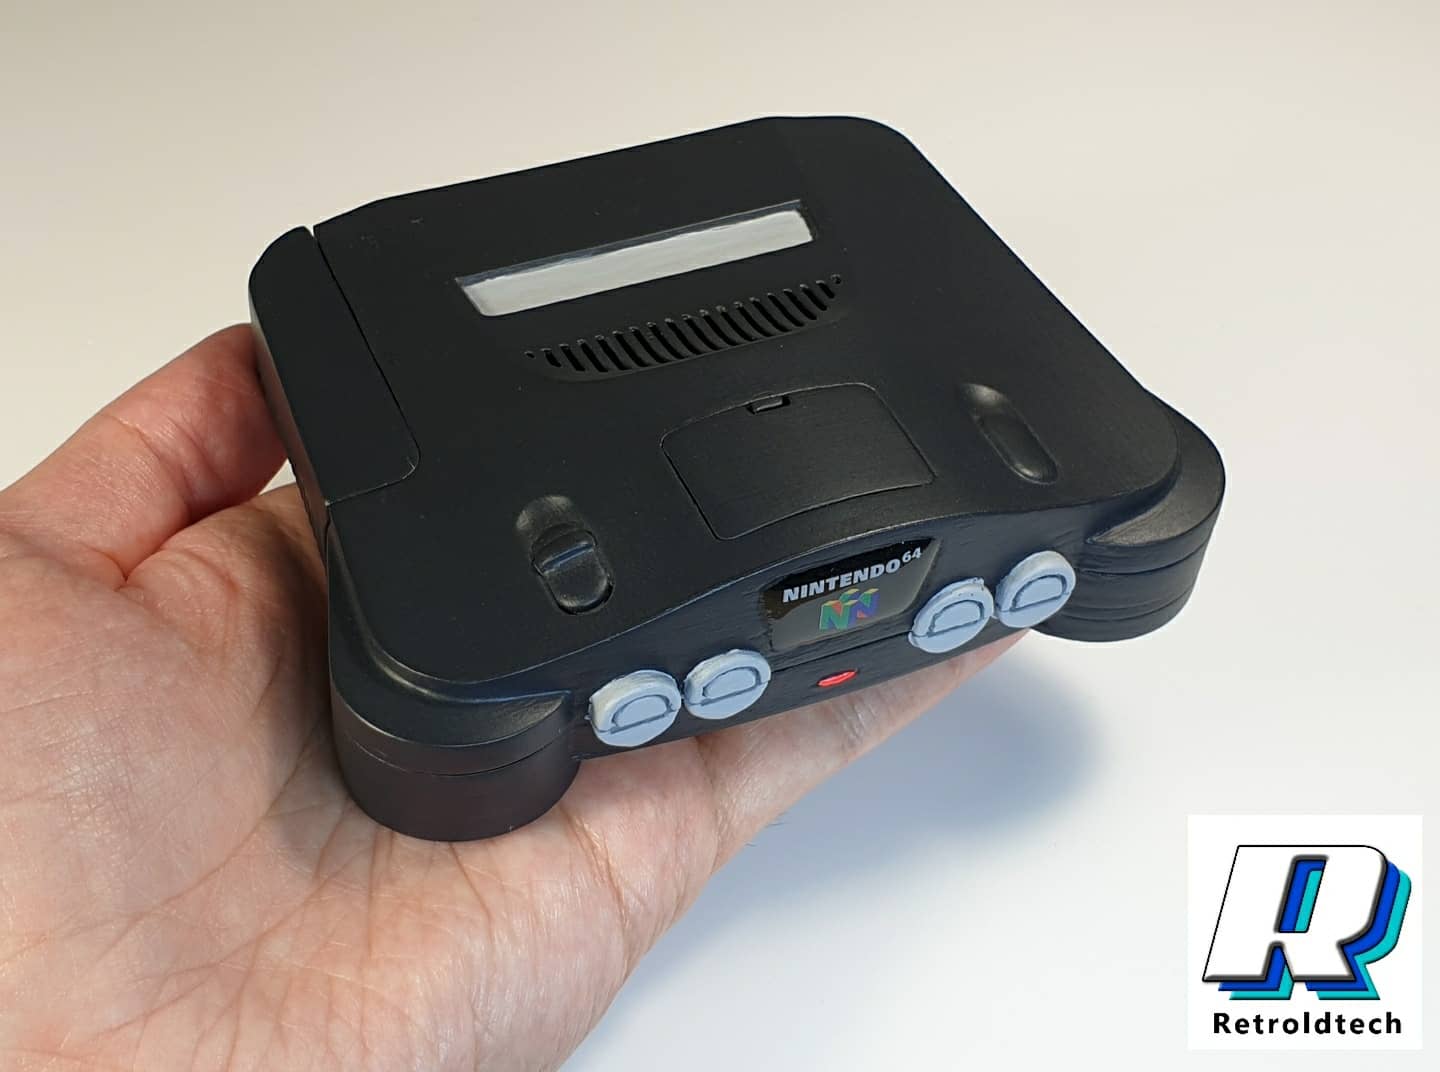 Twitter 上的Retroldtech："1/2 Scale Mini Nintendo 64 😉. Made this Raspberry pi case a couple of years ago and I finished it today with the N64 jewel # nintendo #nintendo64 #retrogamer #retrogaming #